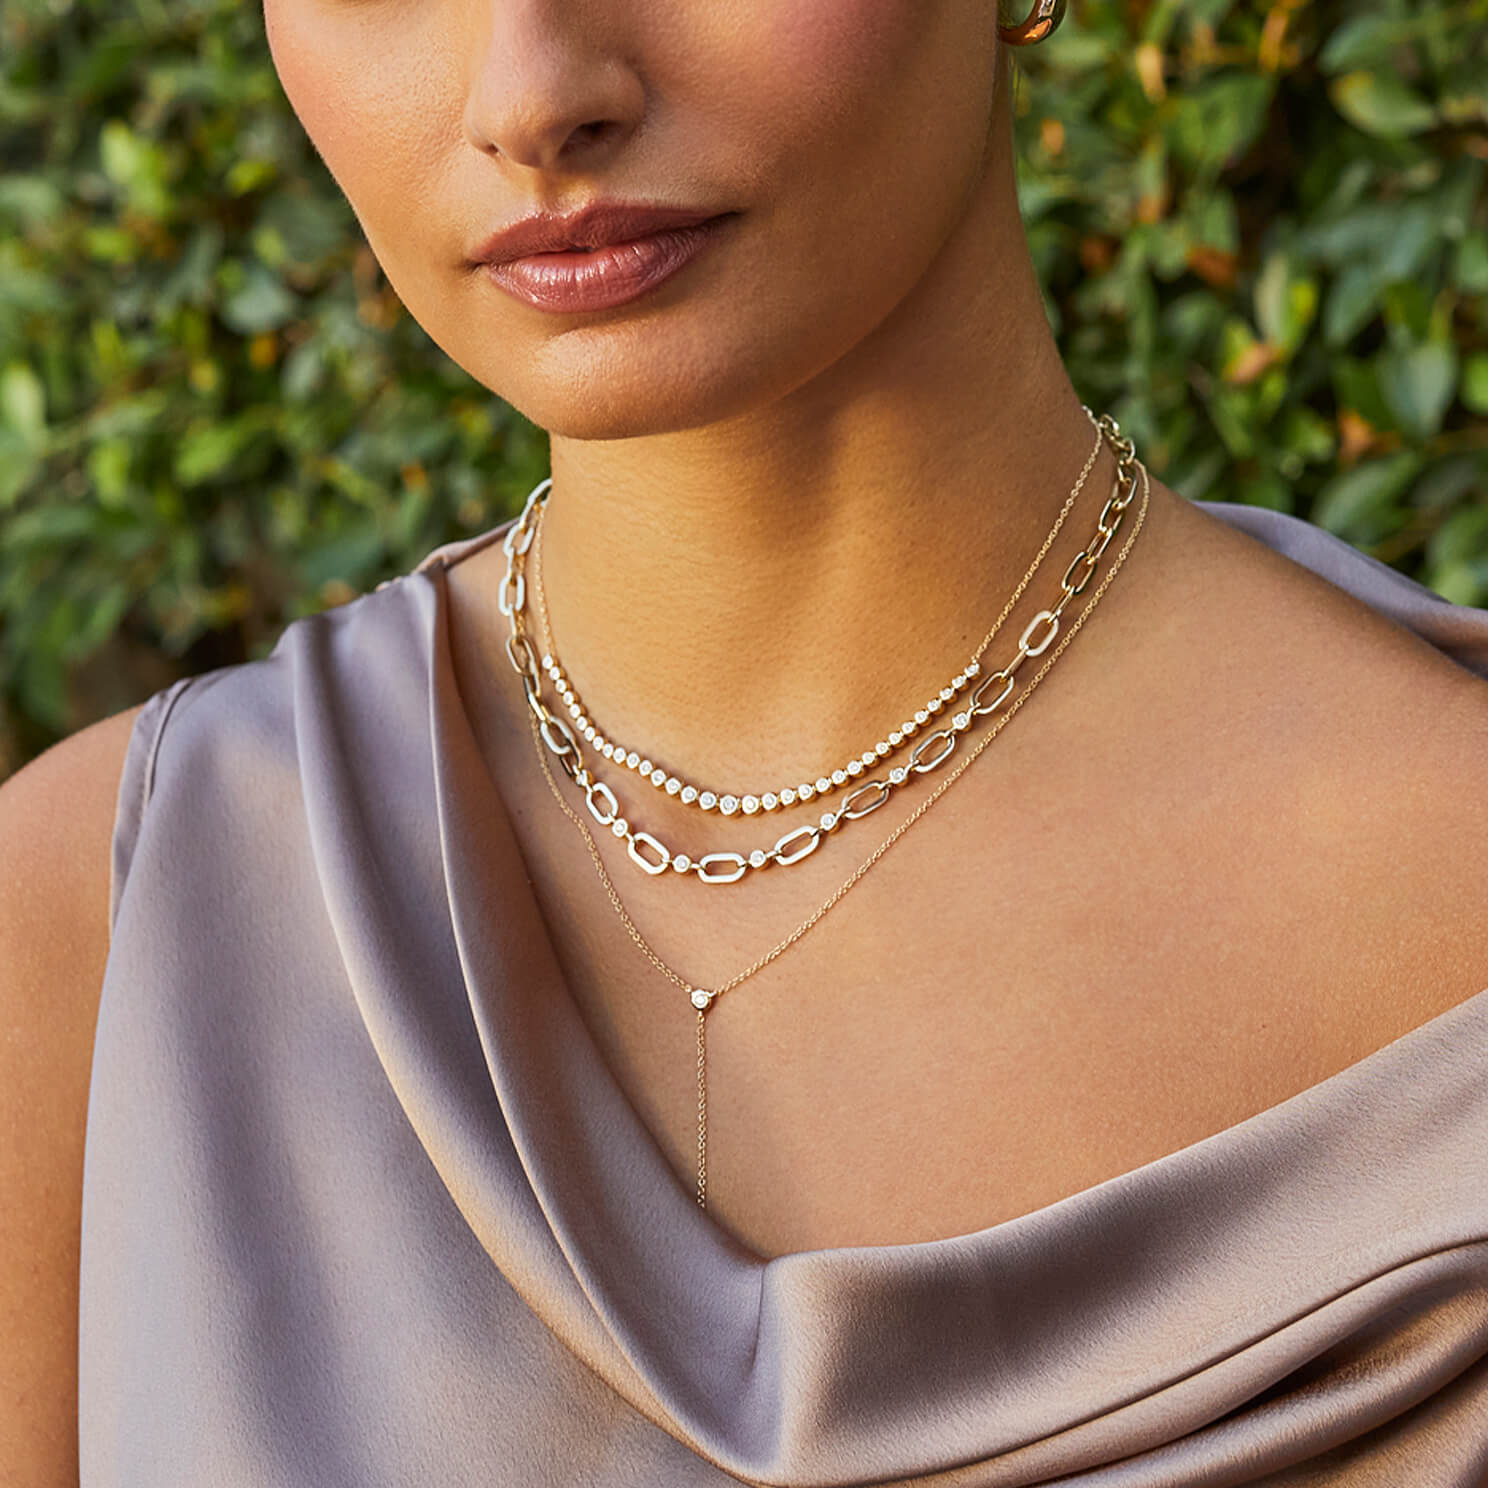 Graduated Diamond Pillow Necklace in 14k yellow gold styled on neck of model with jumbo link diamond pillow necklace and lariat necklace